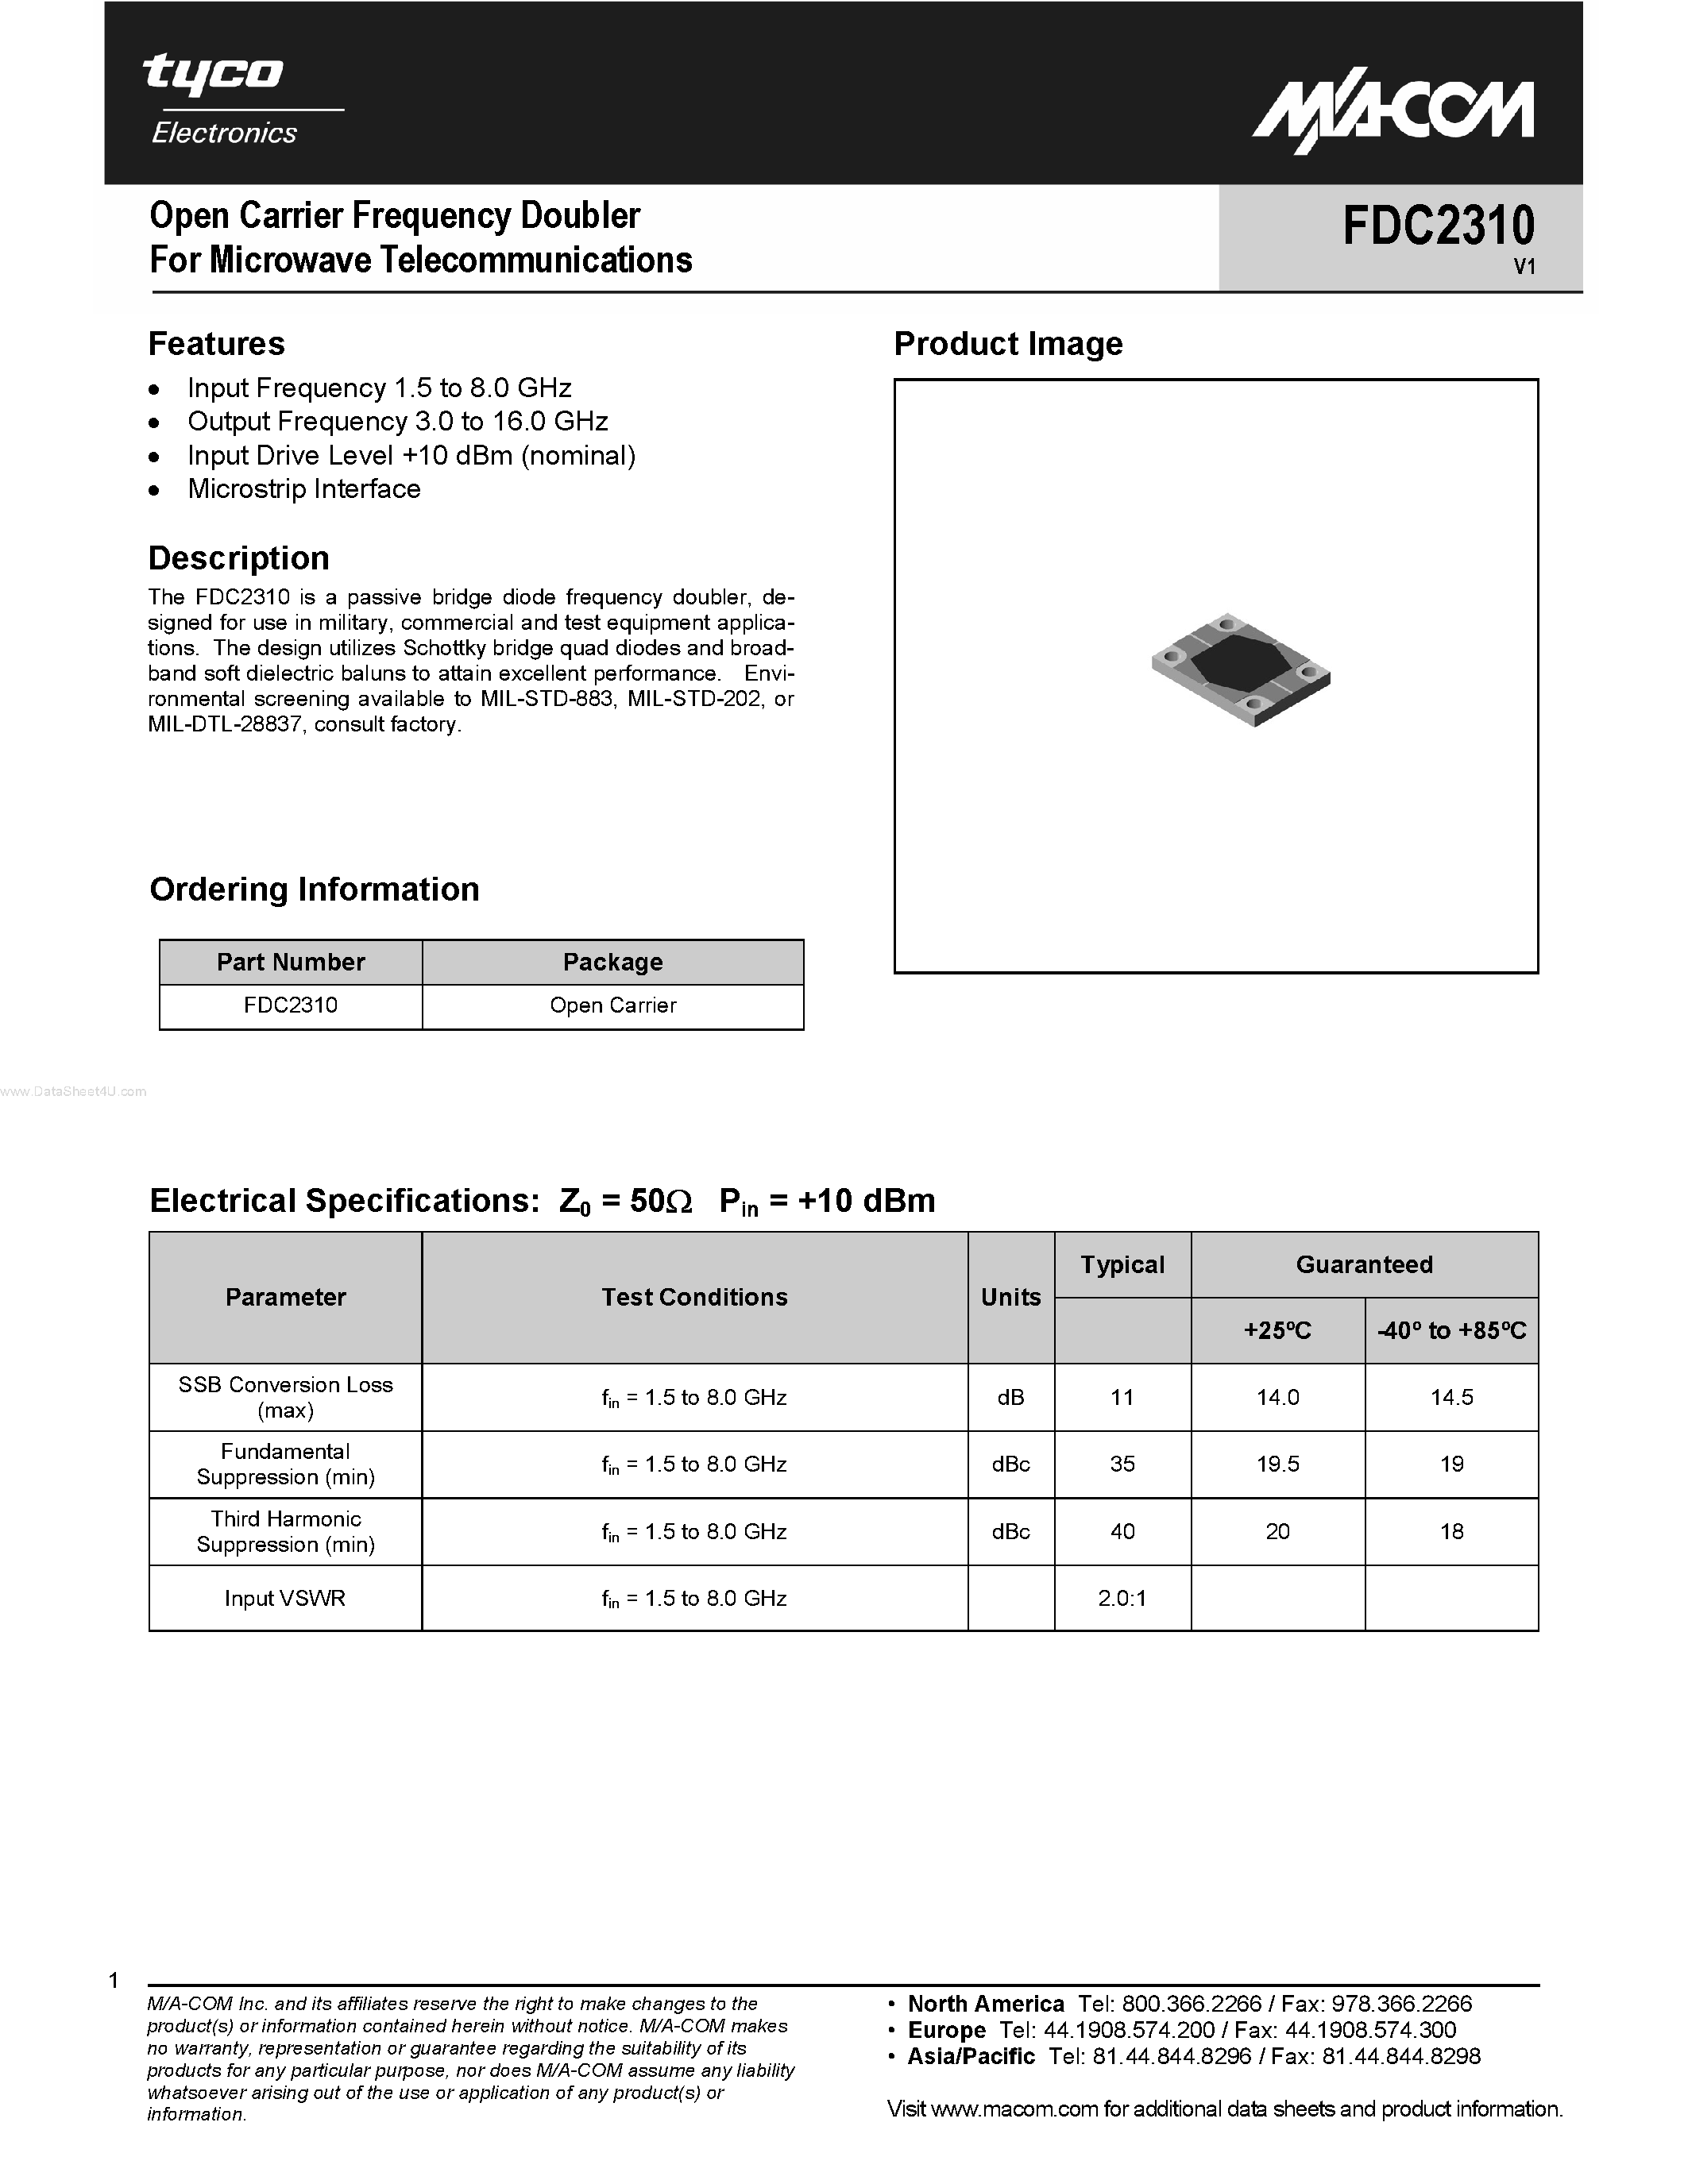 Datasheet FDC2310 - Open Carrier Frequency Doubler page 1